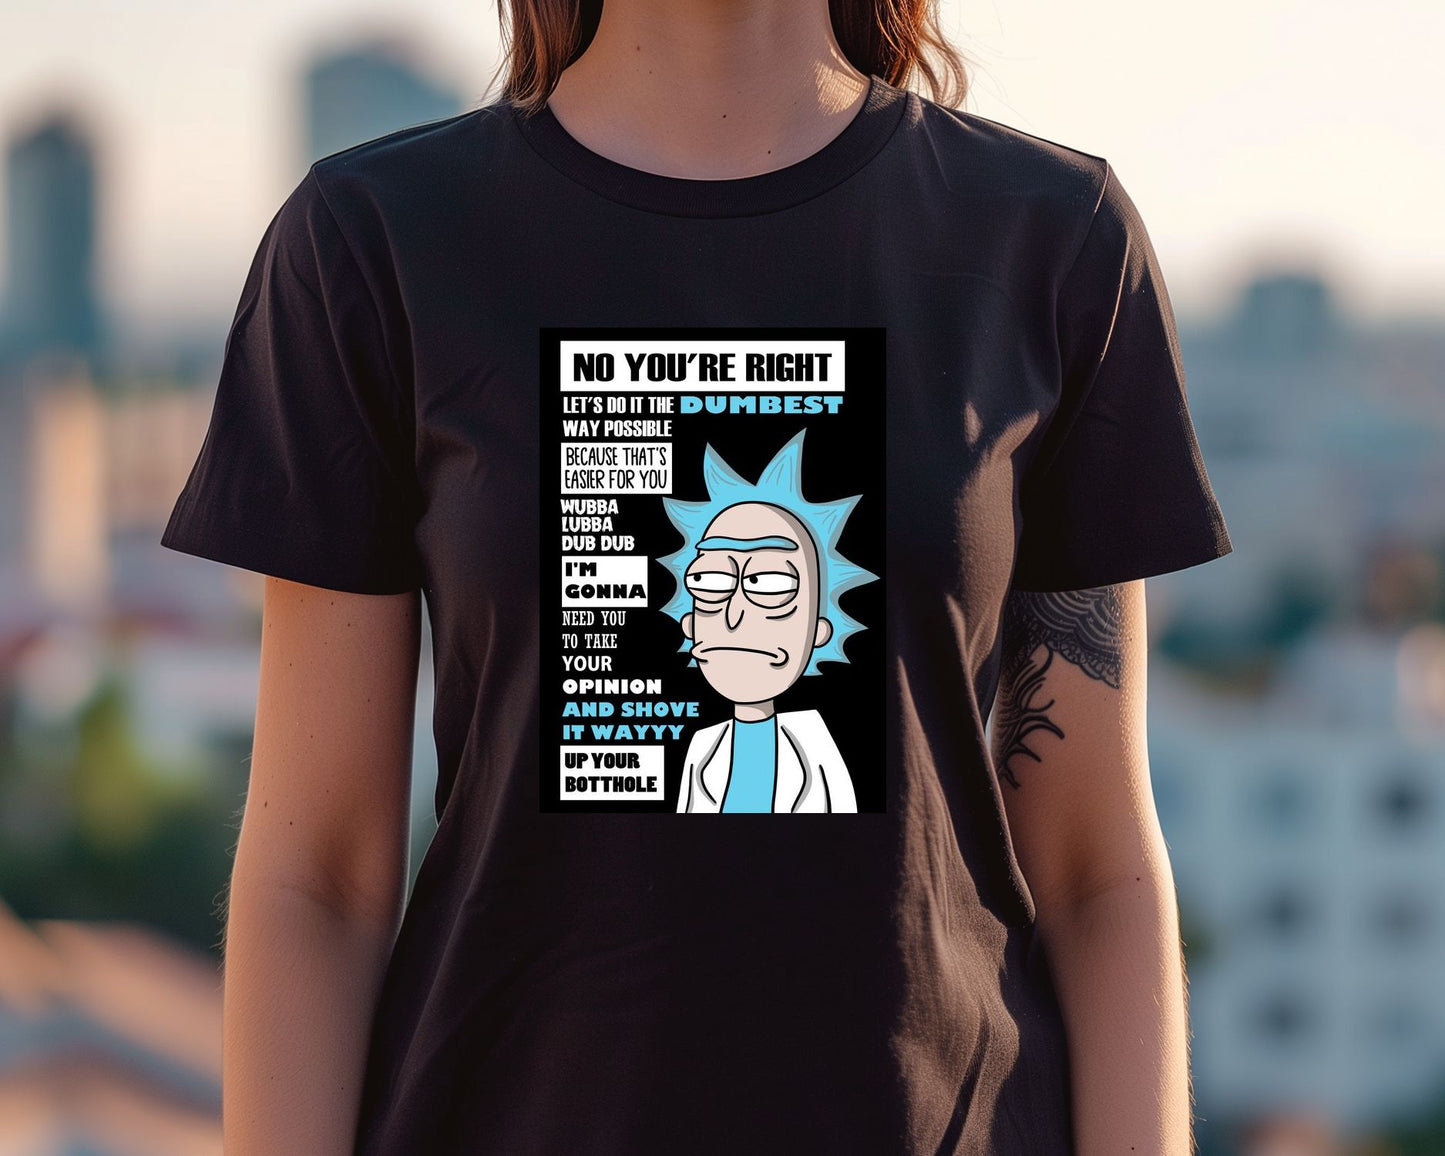 Rick and morty quotes 3 - @Yoho